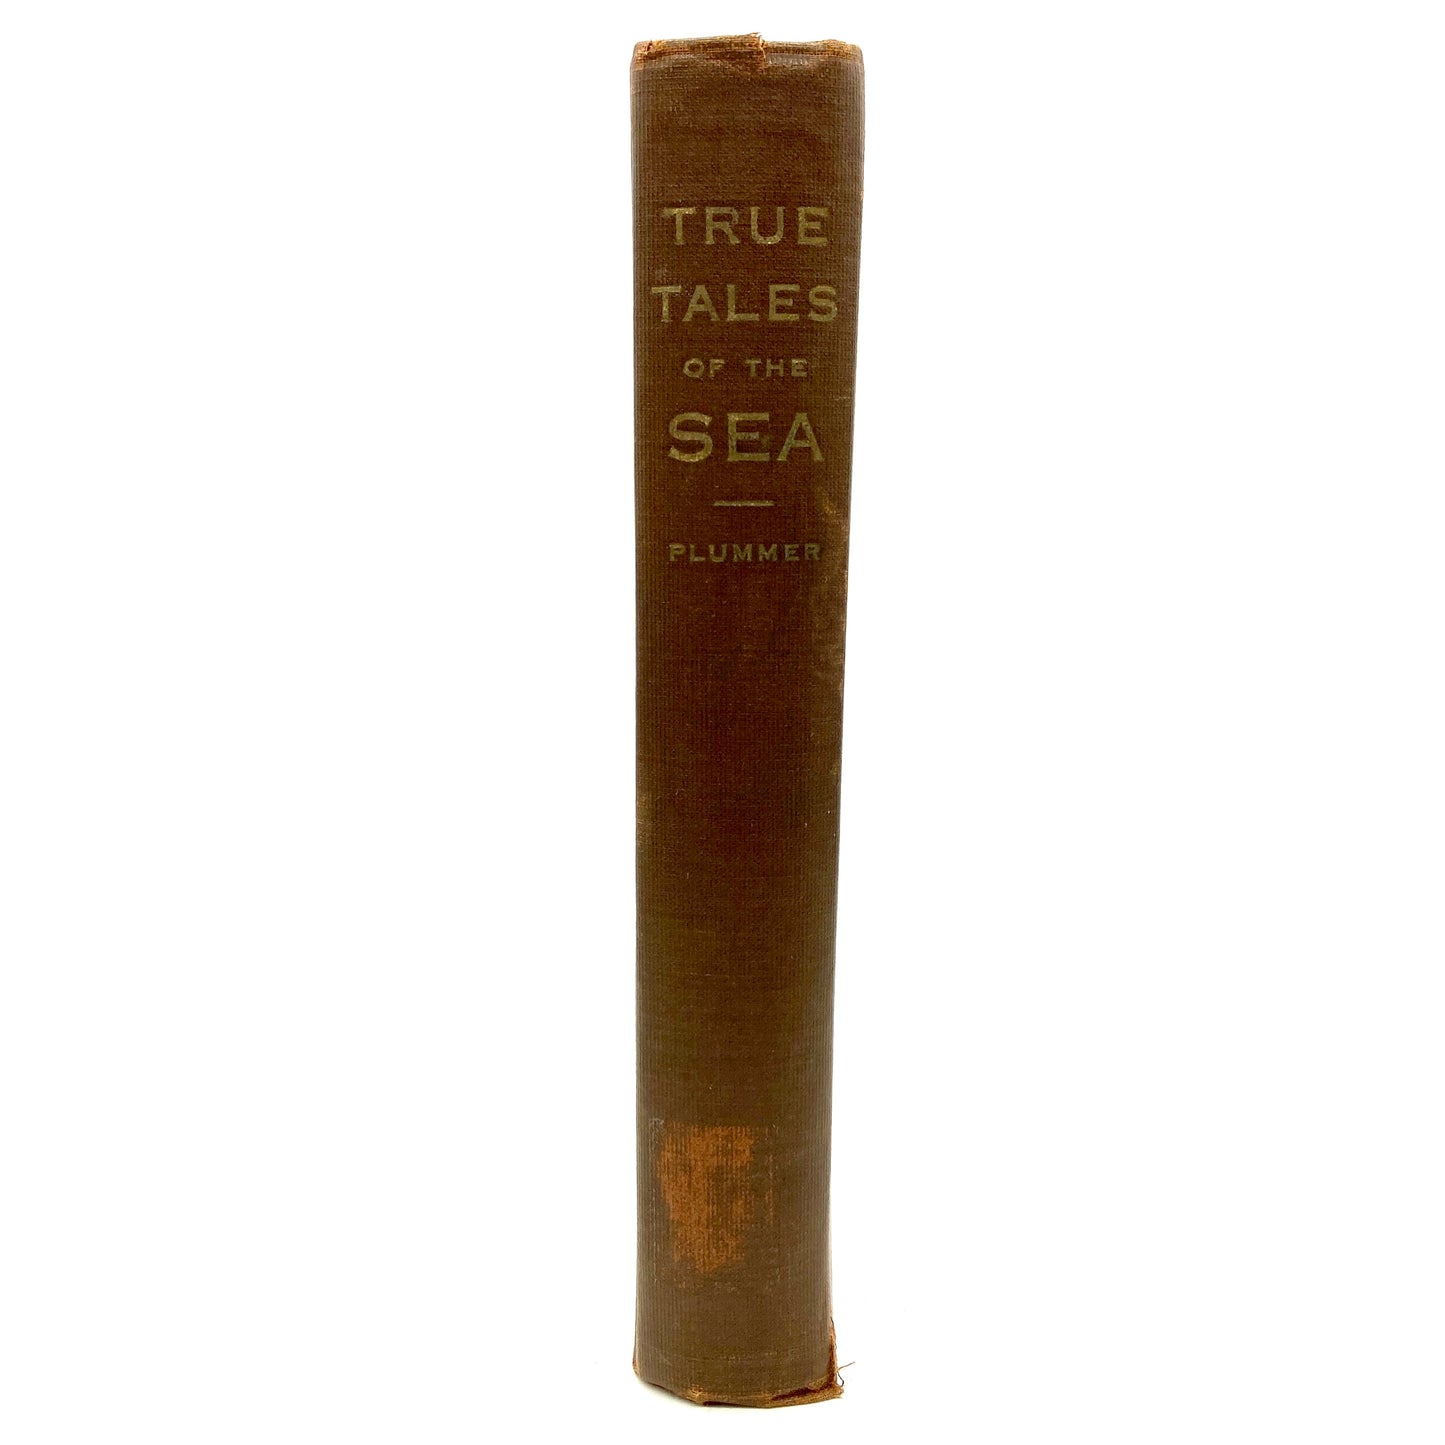 PLUMMER, Edward Clarence "True Tales of the Sea" [Marks Printing House, 1930]